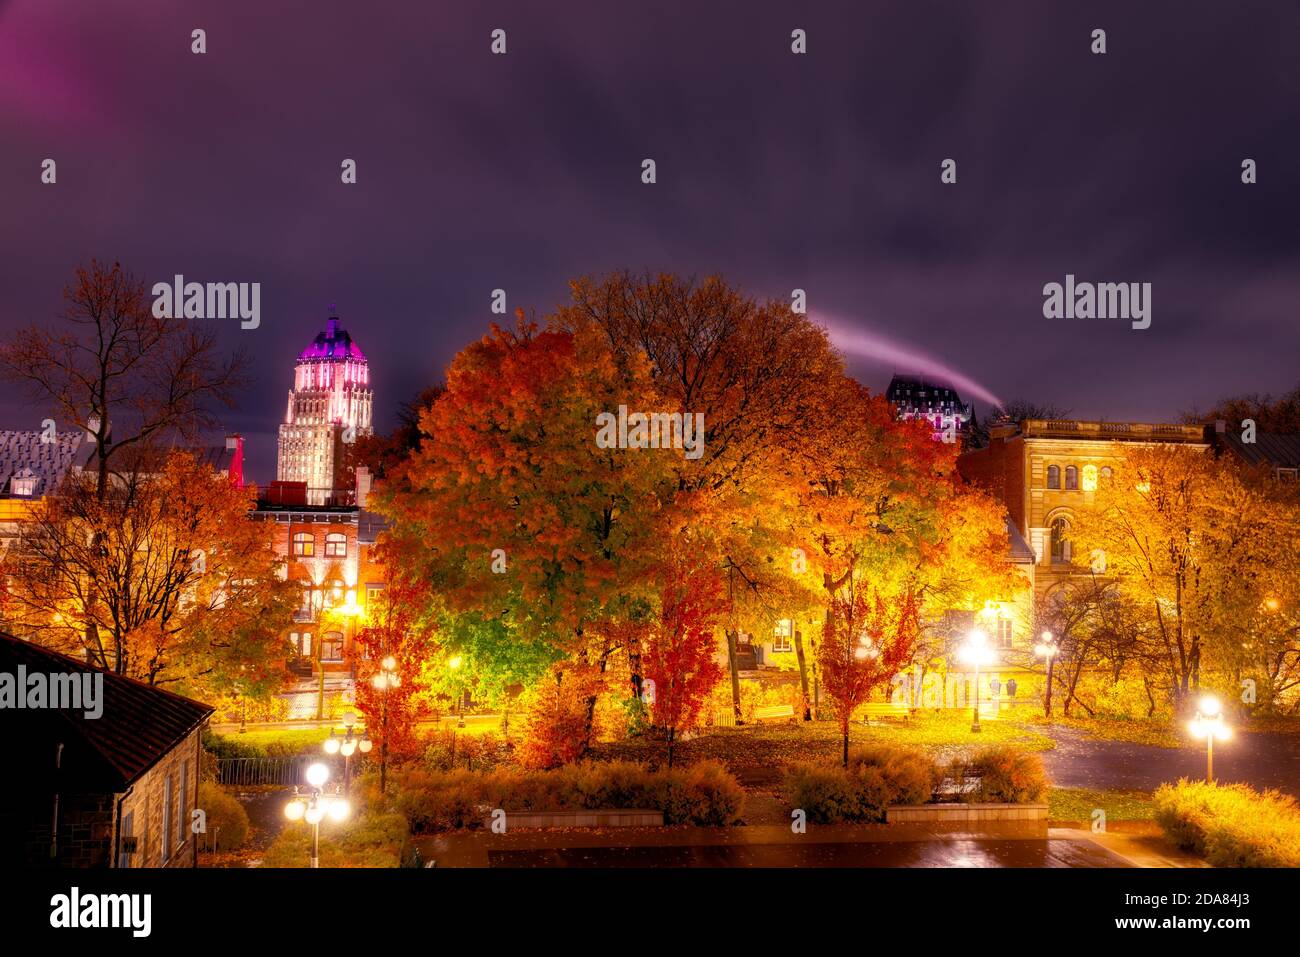 The Price Building, Quebec City, at night in autumn. Stock Photo